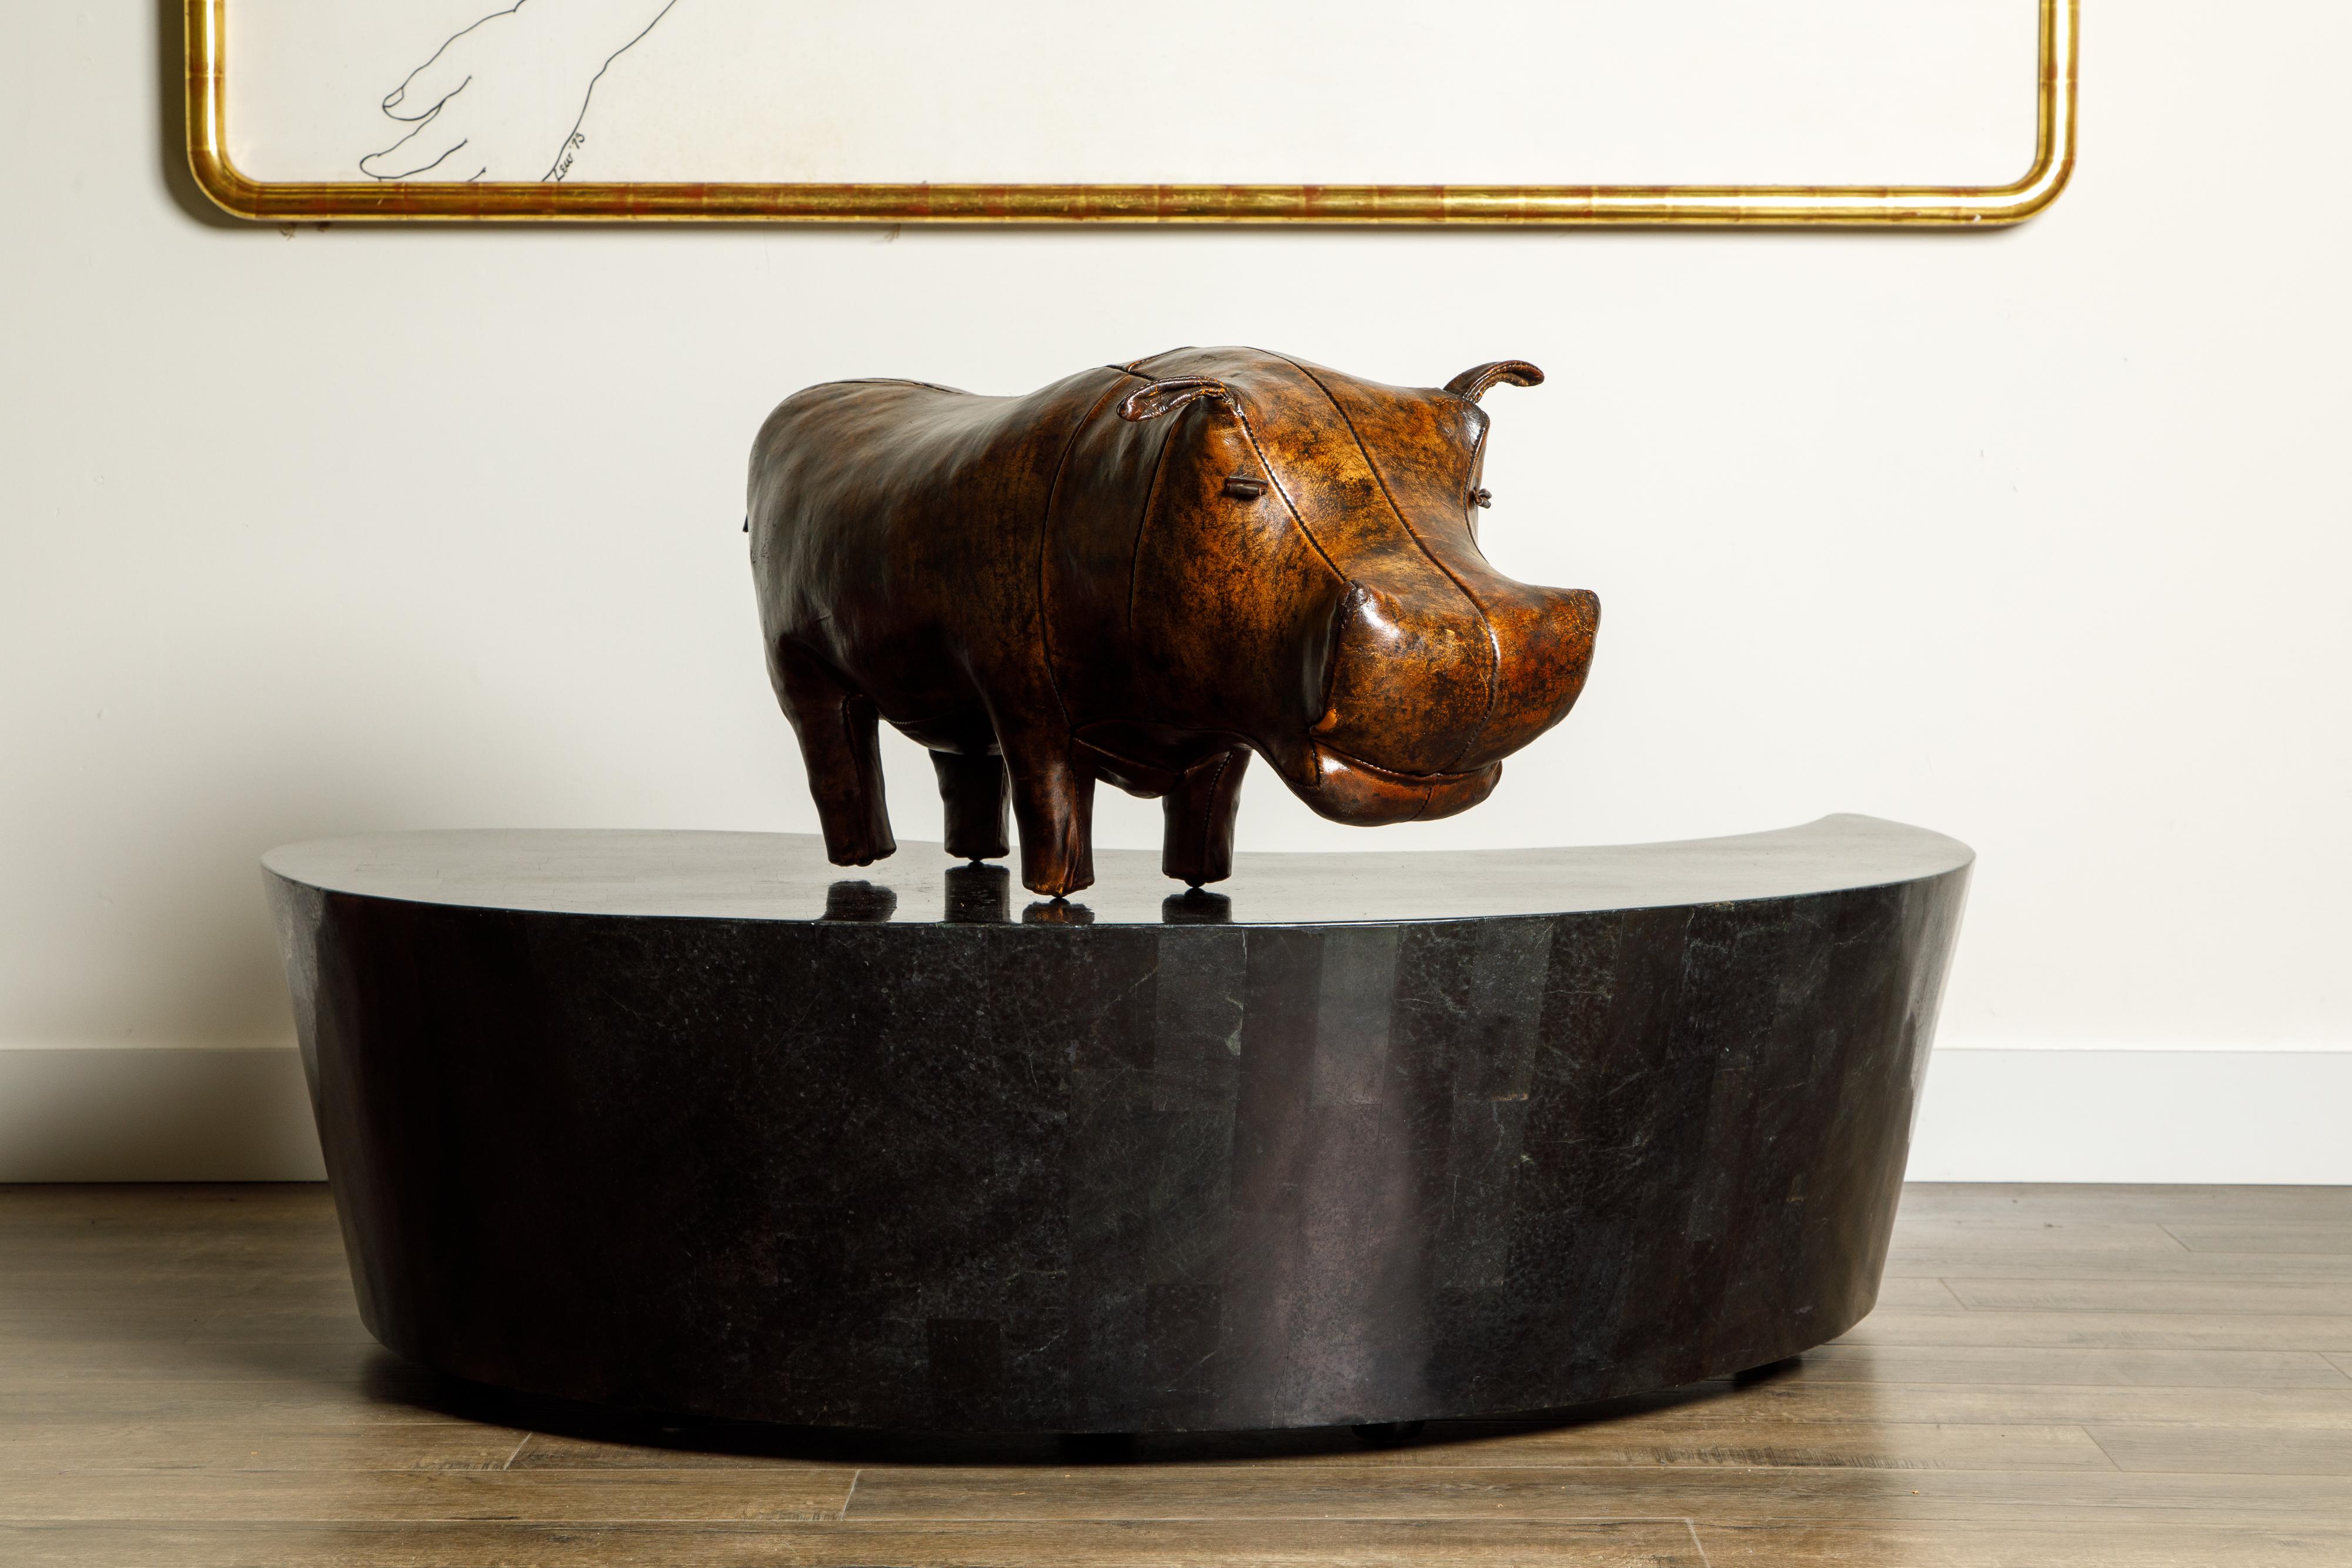 A wonderful collectors A&F signed example of the original Hippopotamus footstool by Dimitri Omersa for Abercrombie and Fitch, circa 1970 in beautiful deep and dark waxed patina leather finish throughout. This example is signed with the A&F logo